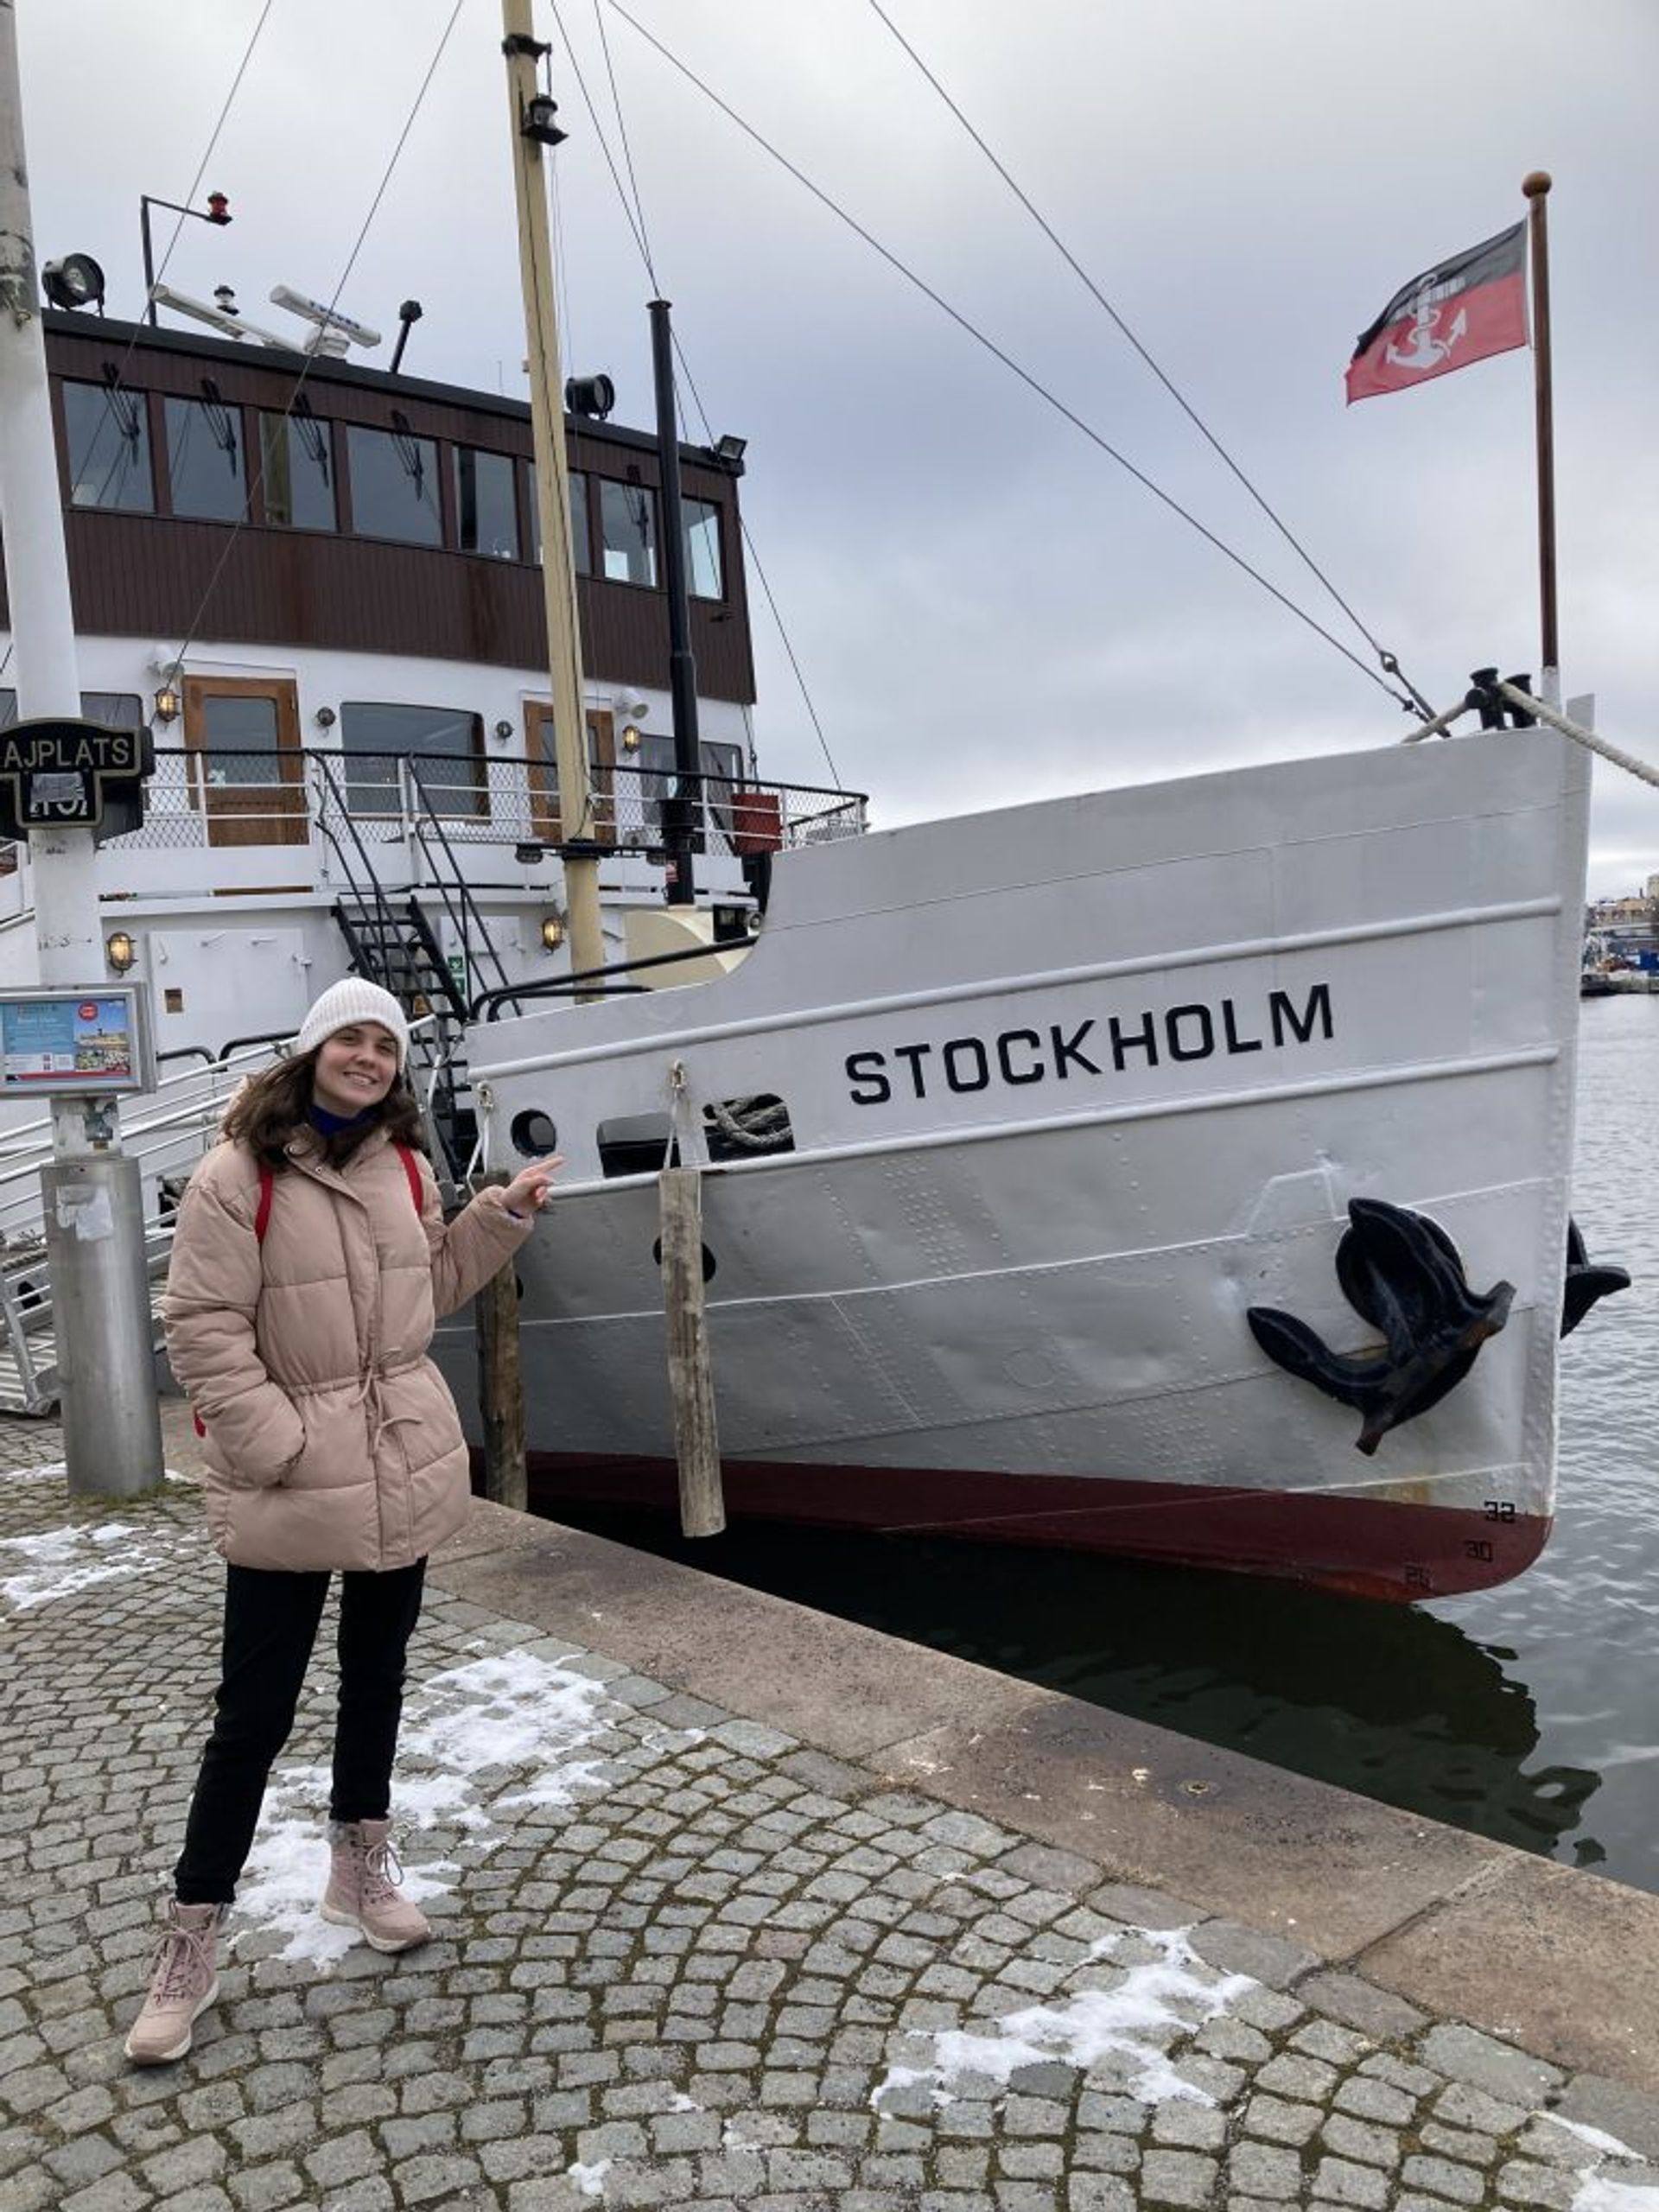 A girl posing next to a boat.